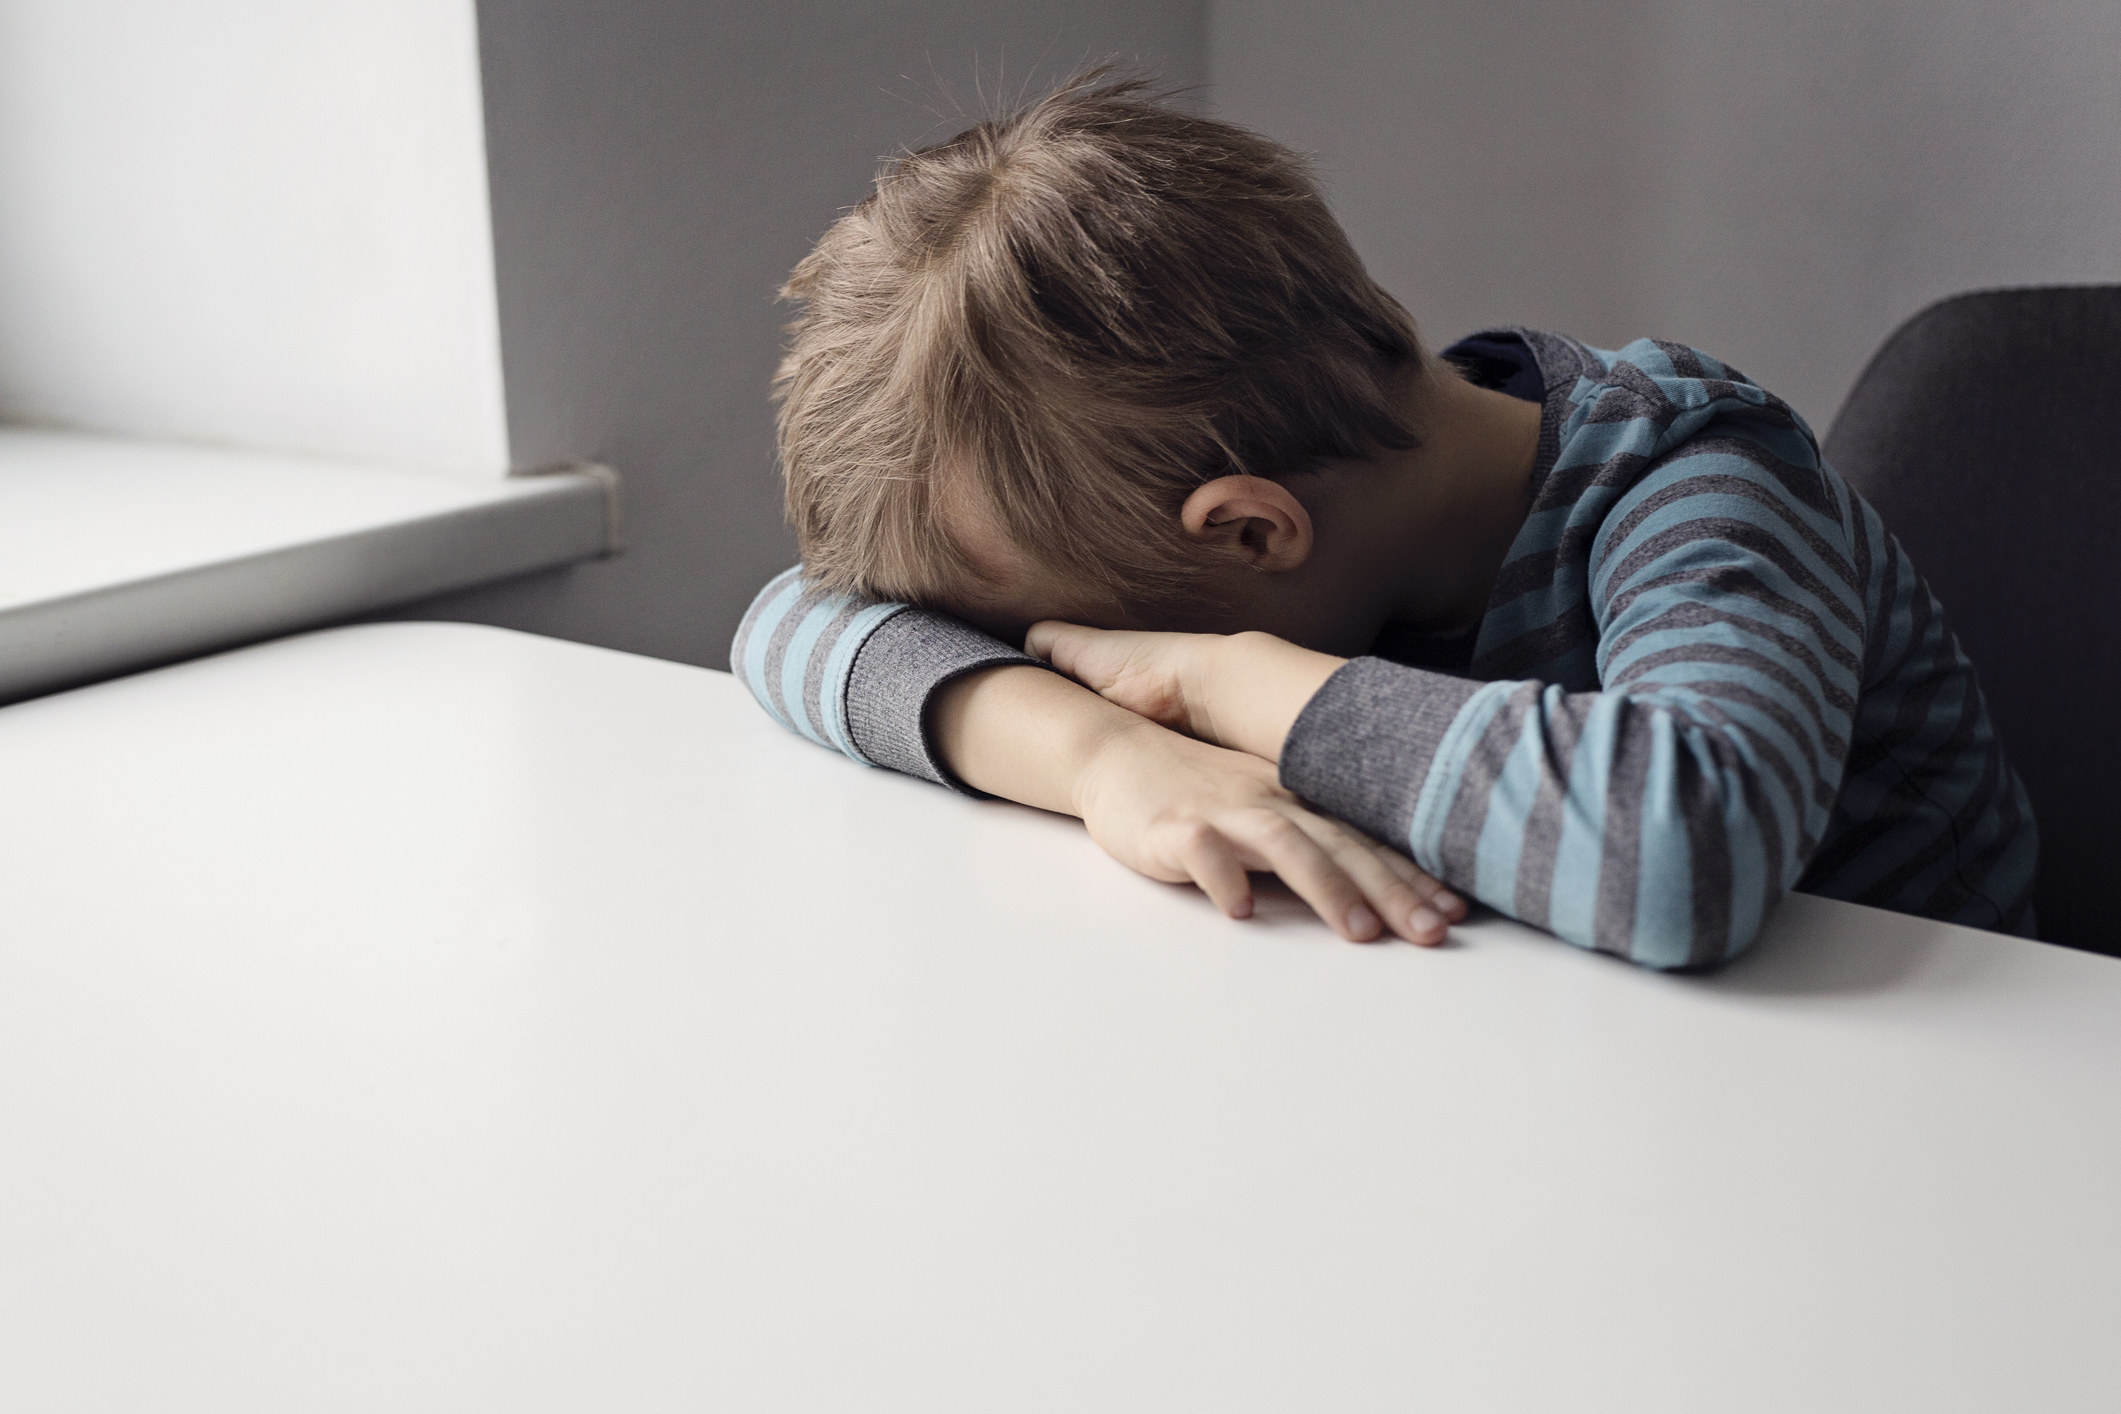 A kid laying his head in his arms on a table